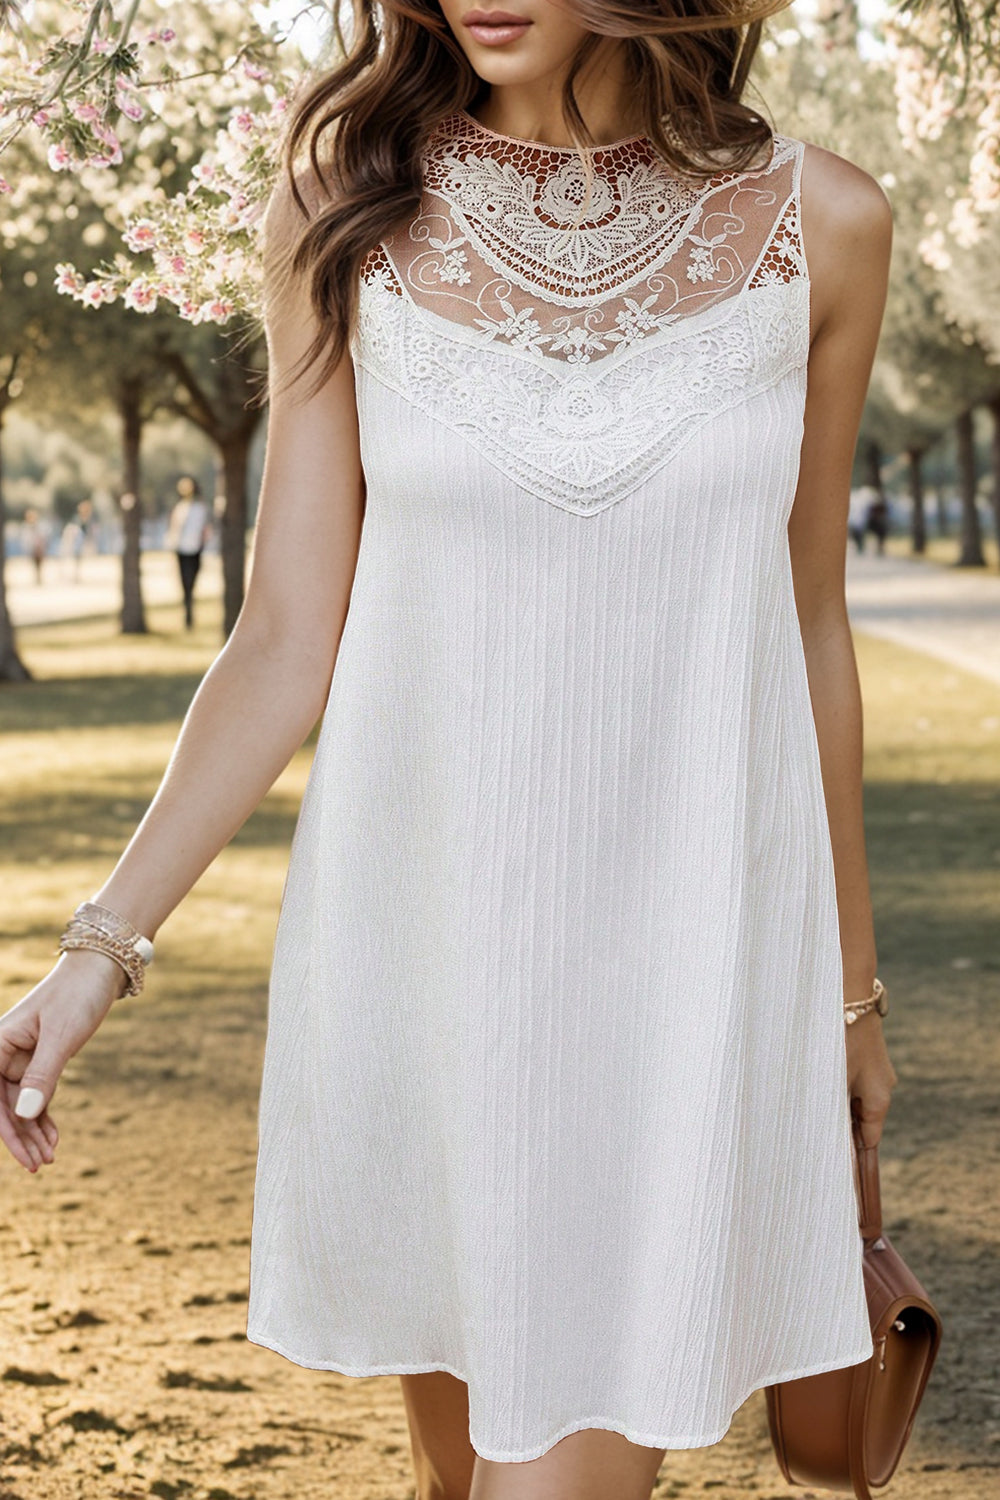 White Graduation Dress with Lace Detail and Round Neck Sleeveless Design